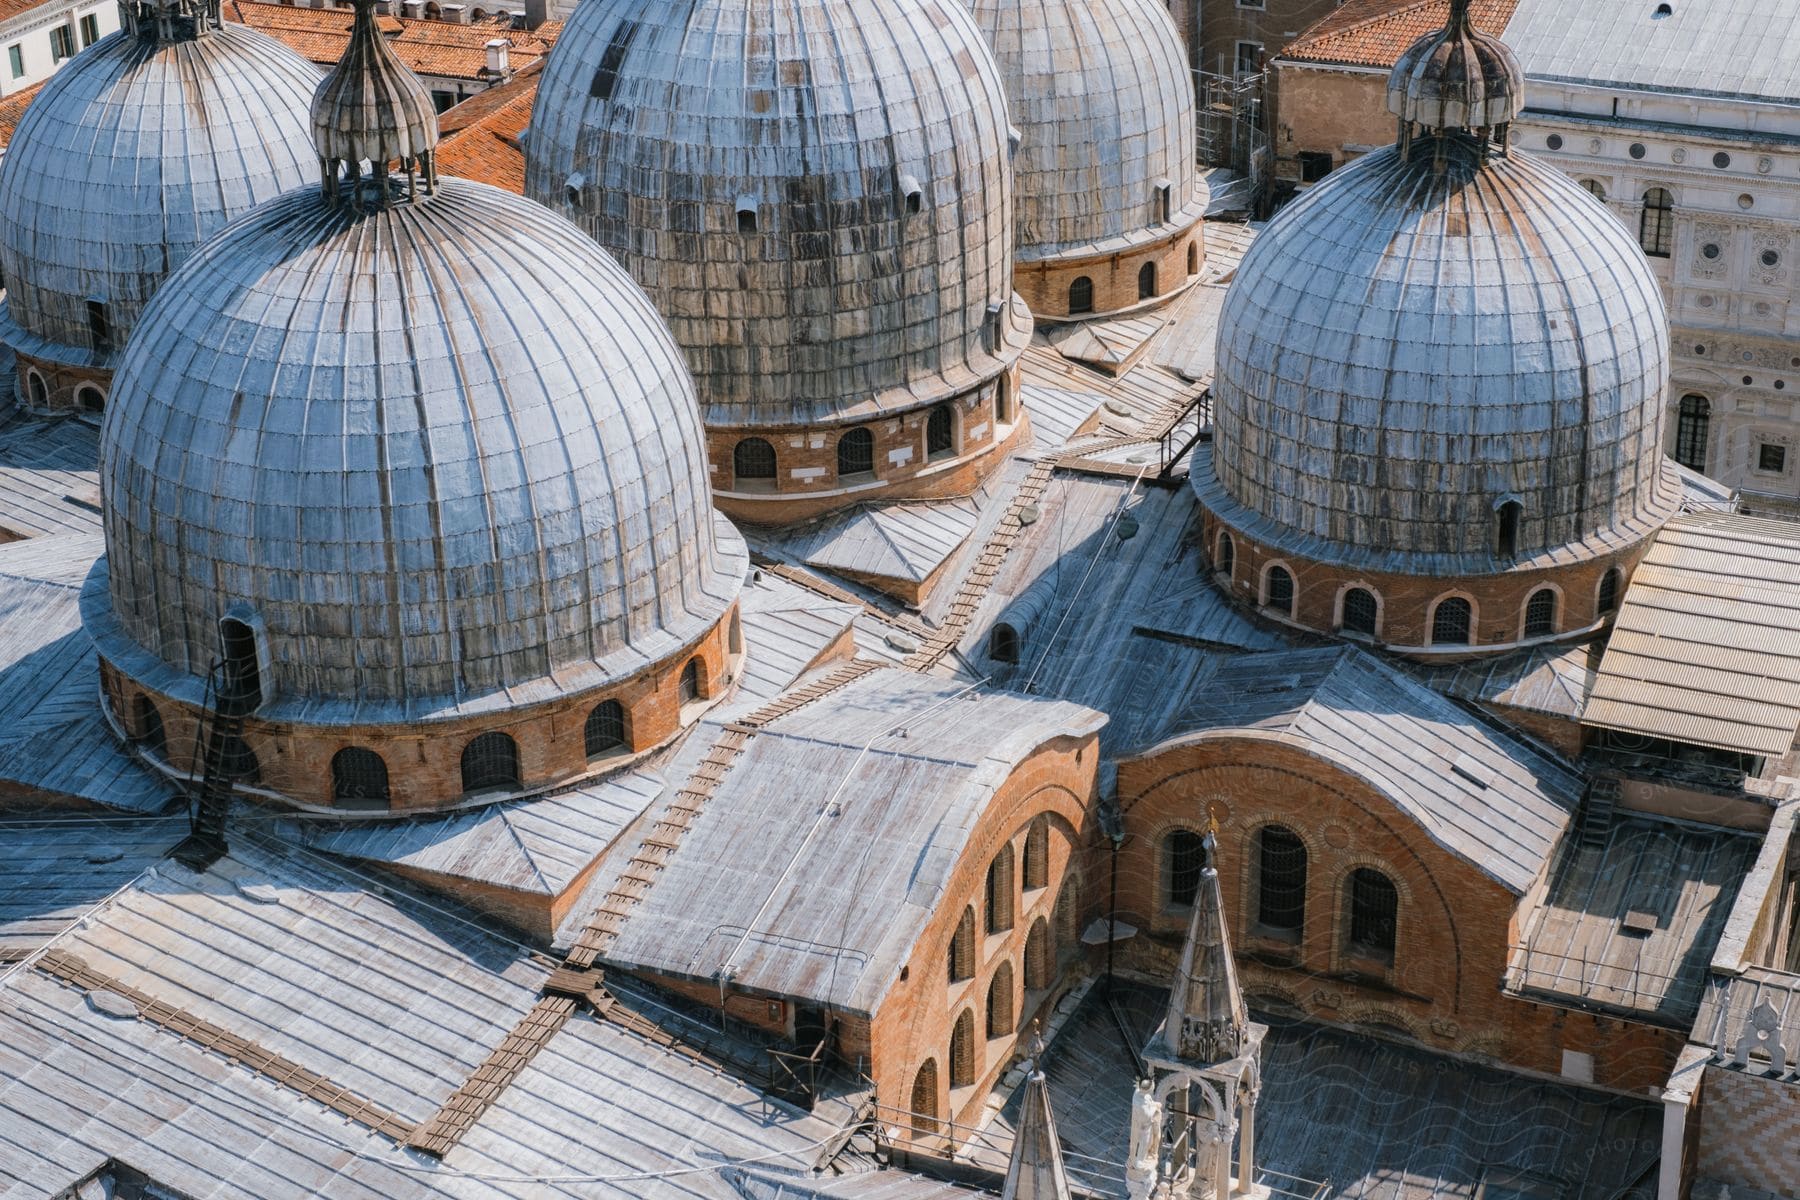 Aerial view of the five domes of Saint Mark's Basilica, with an entrance staircase leading up to one of the domes.